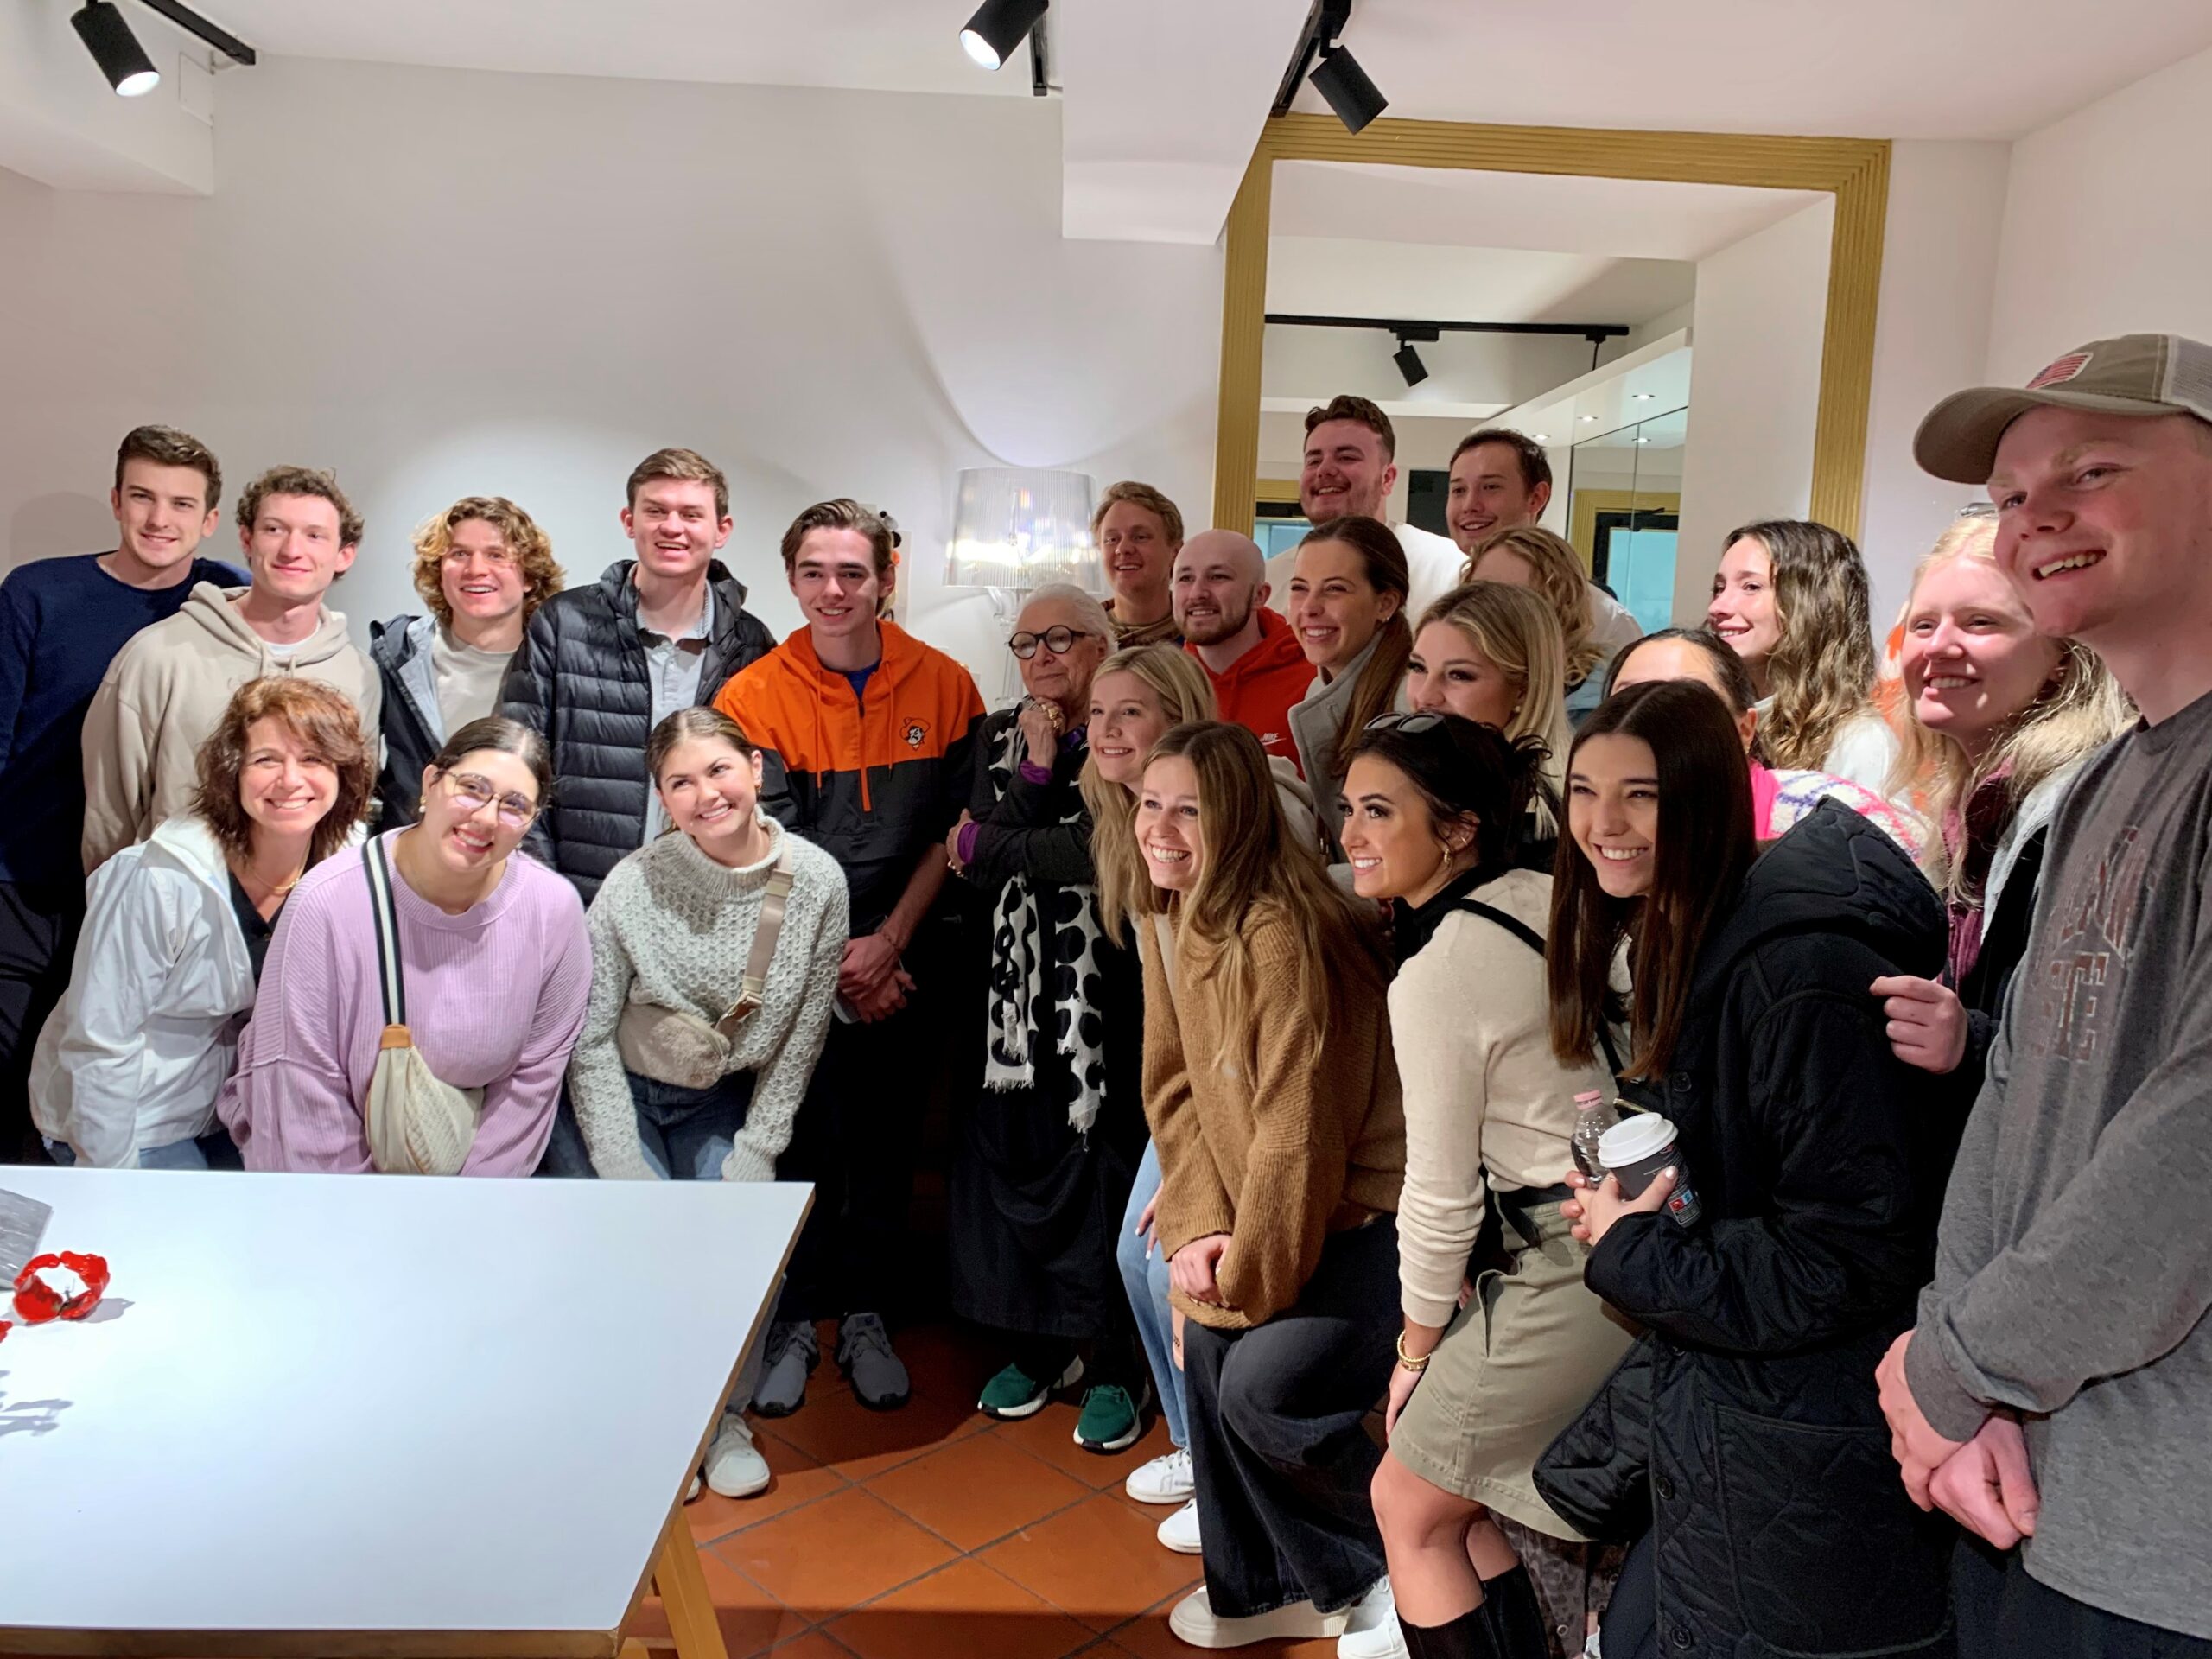 Students from Oklahoma State University during an artisans tour in Florence